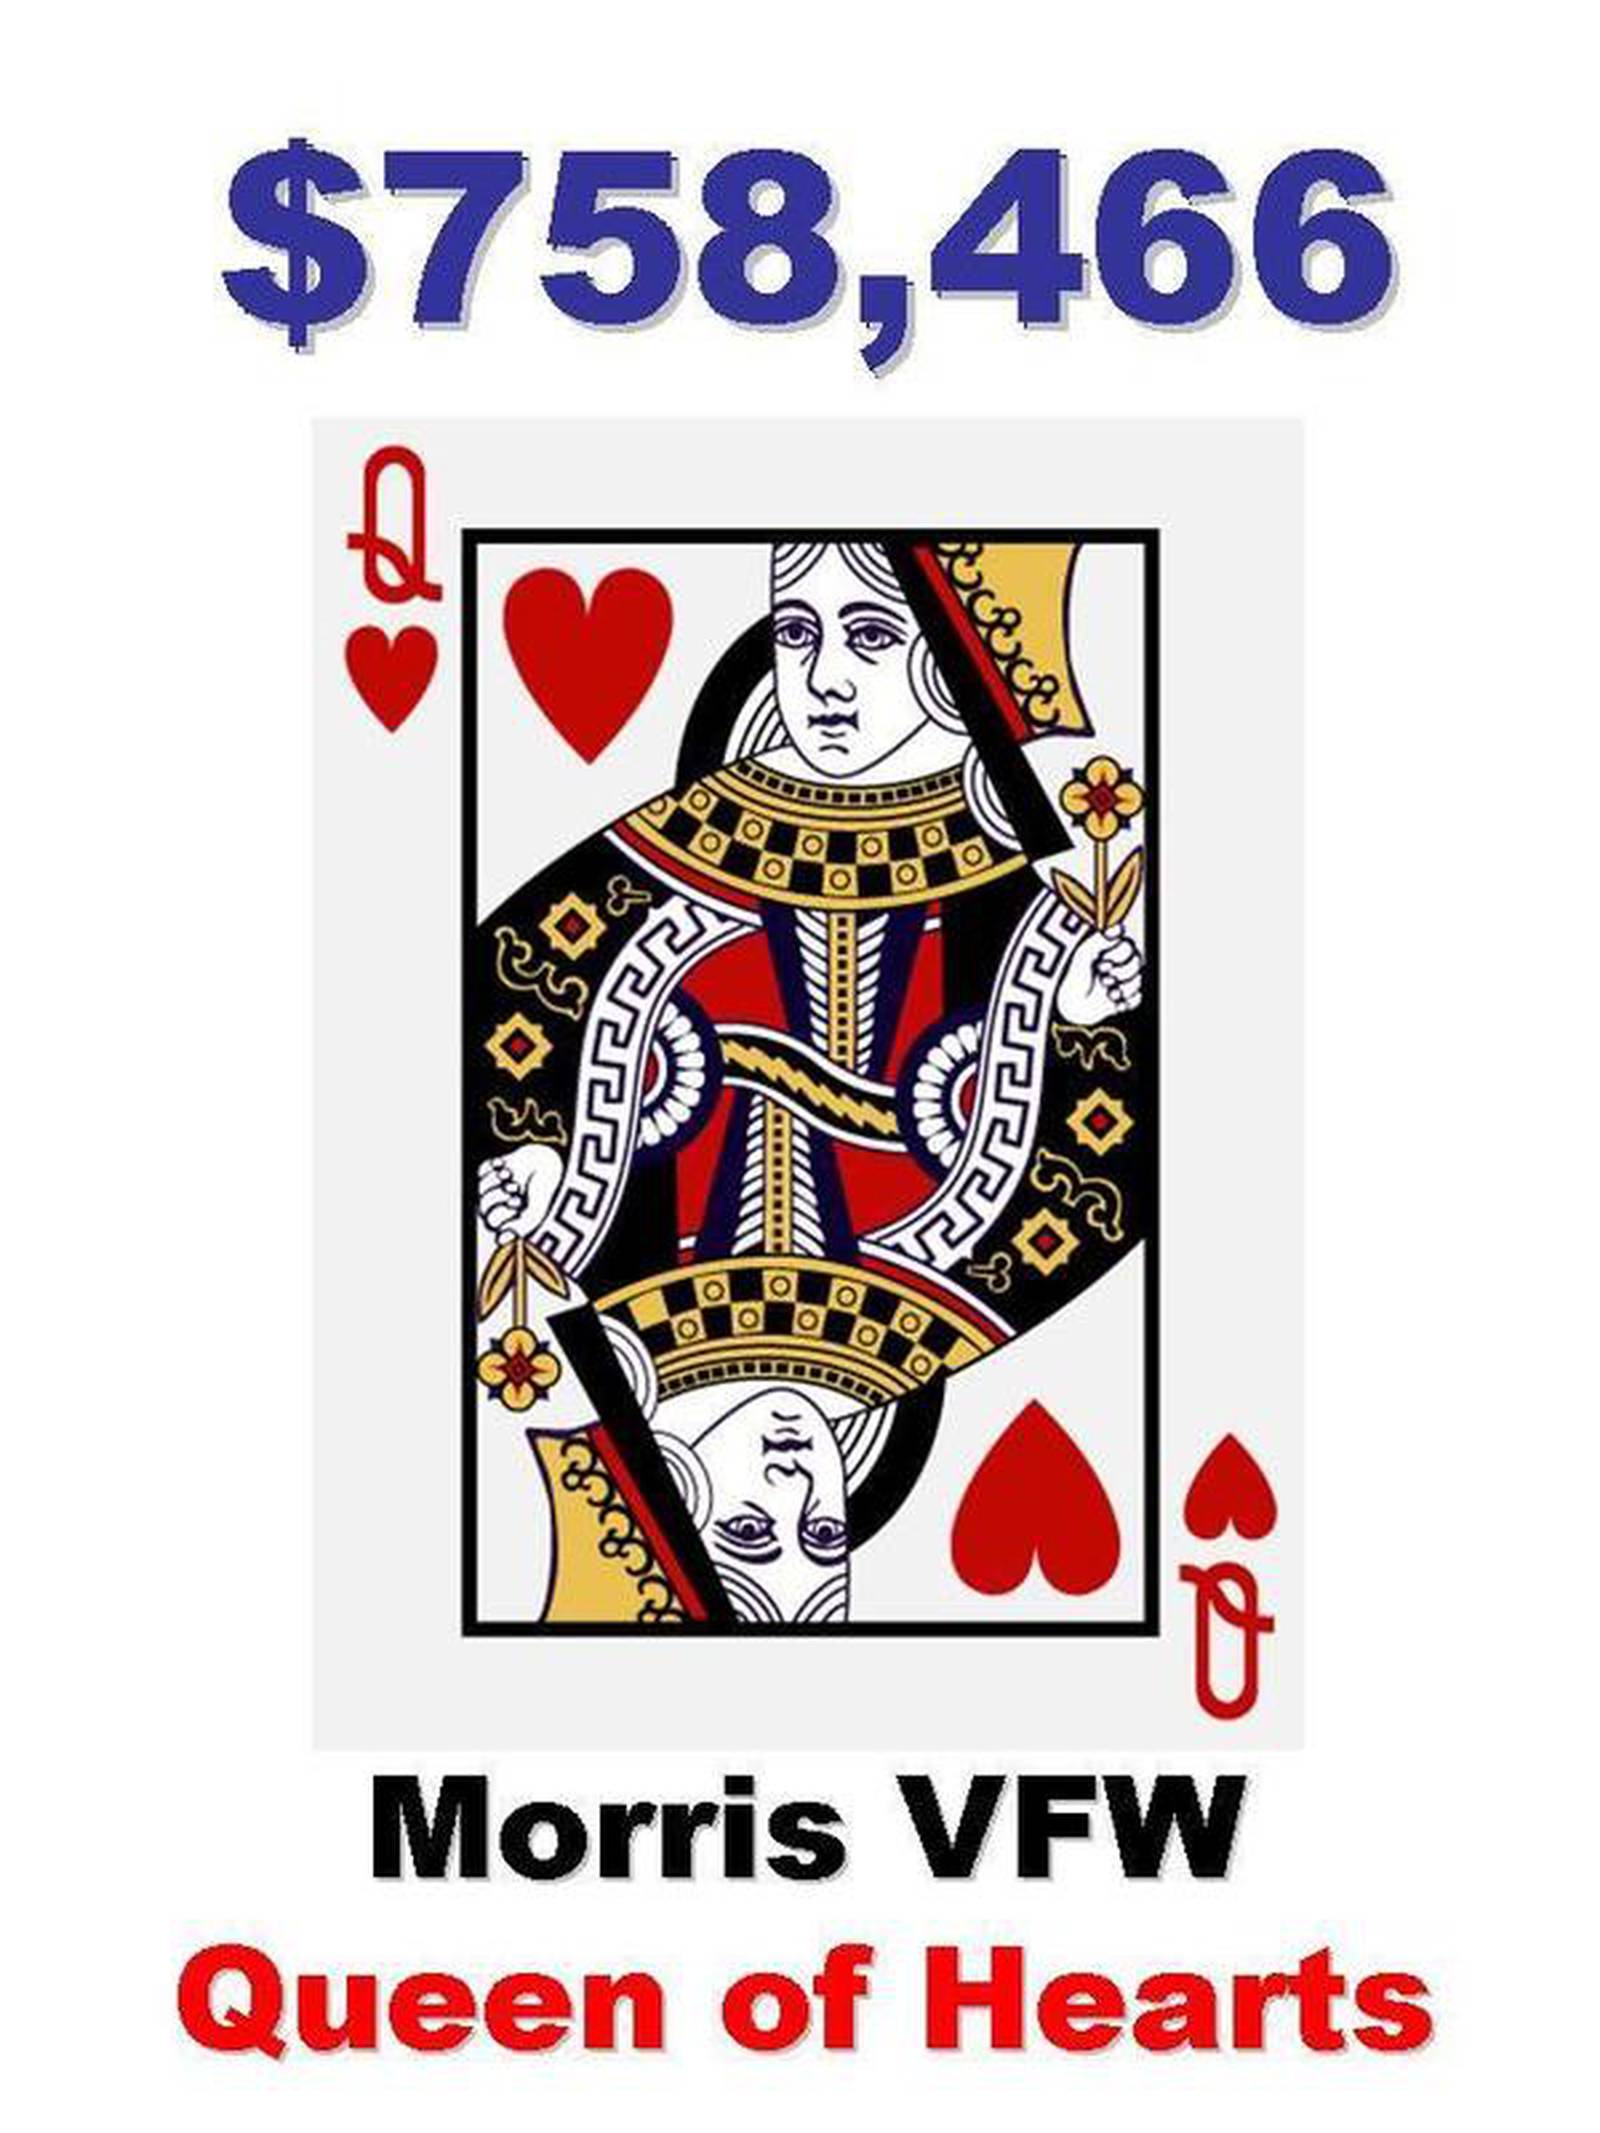 Morris VFW Queen of Hearts drawing is back Shaw Local